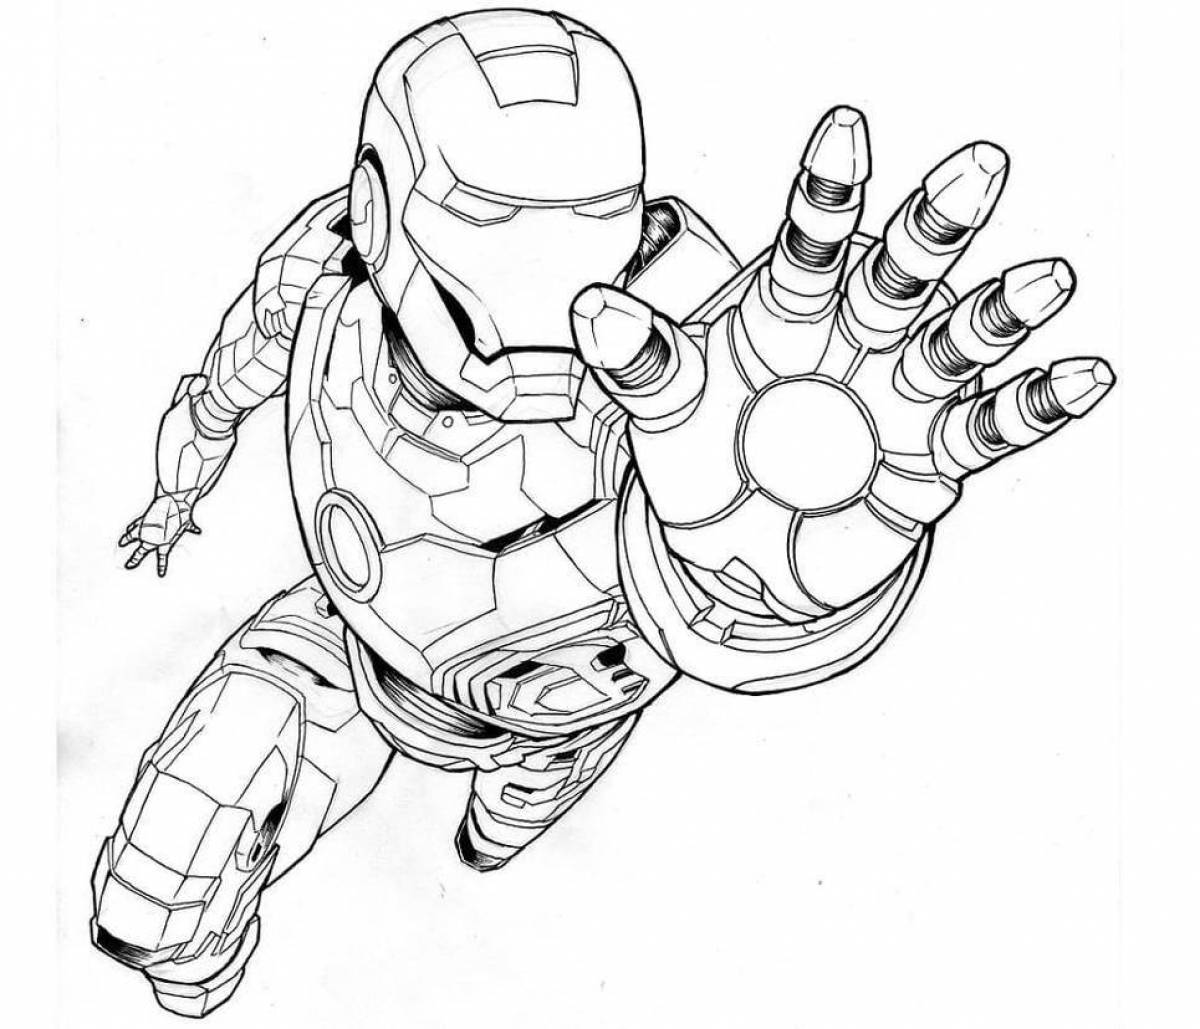 Fantastic iron man coloring book for kids